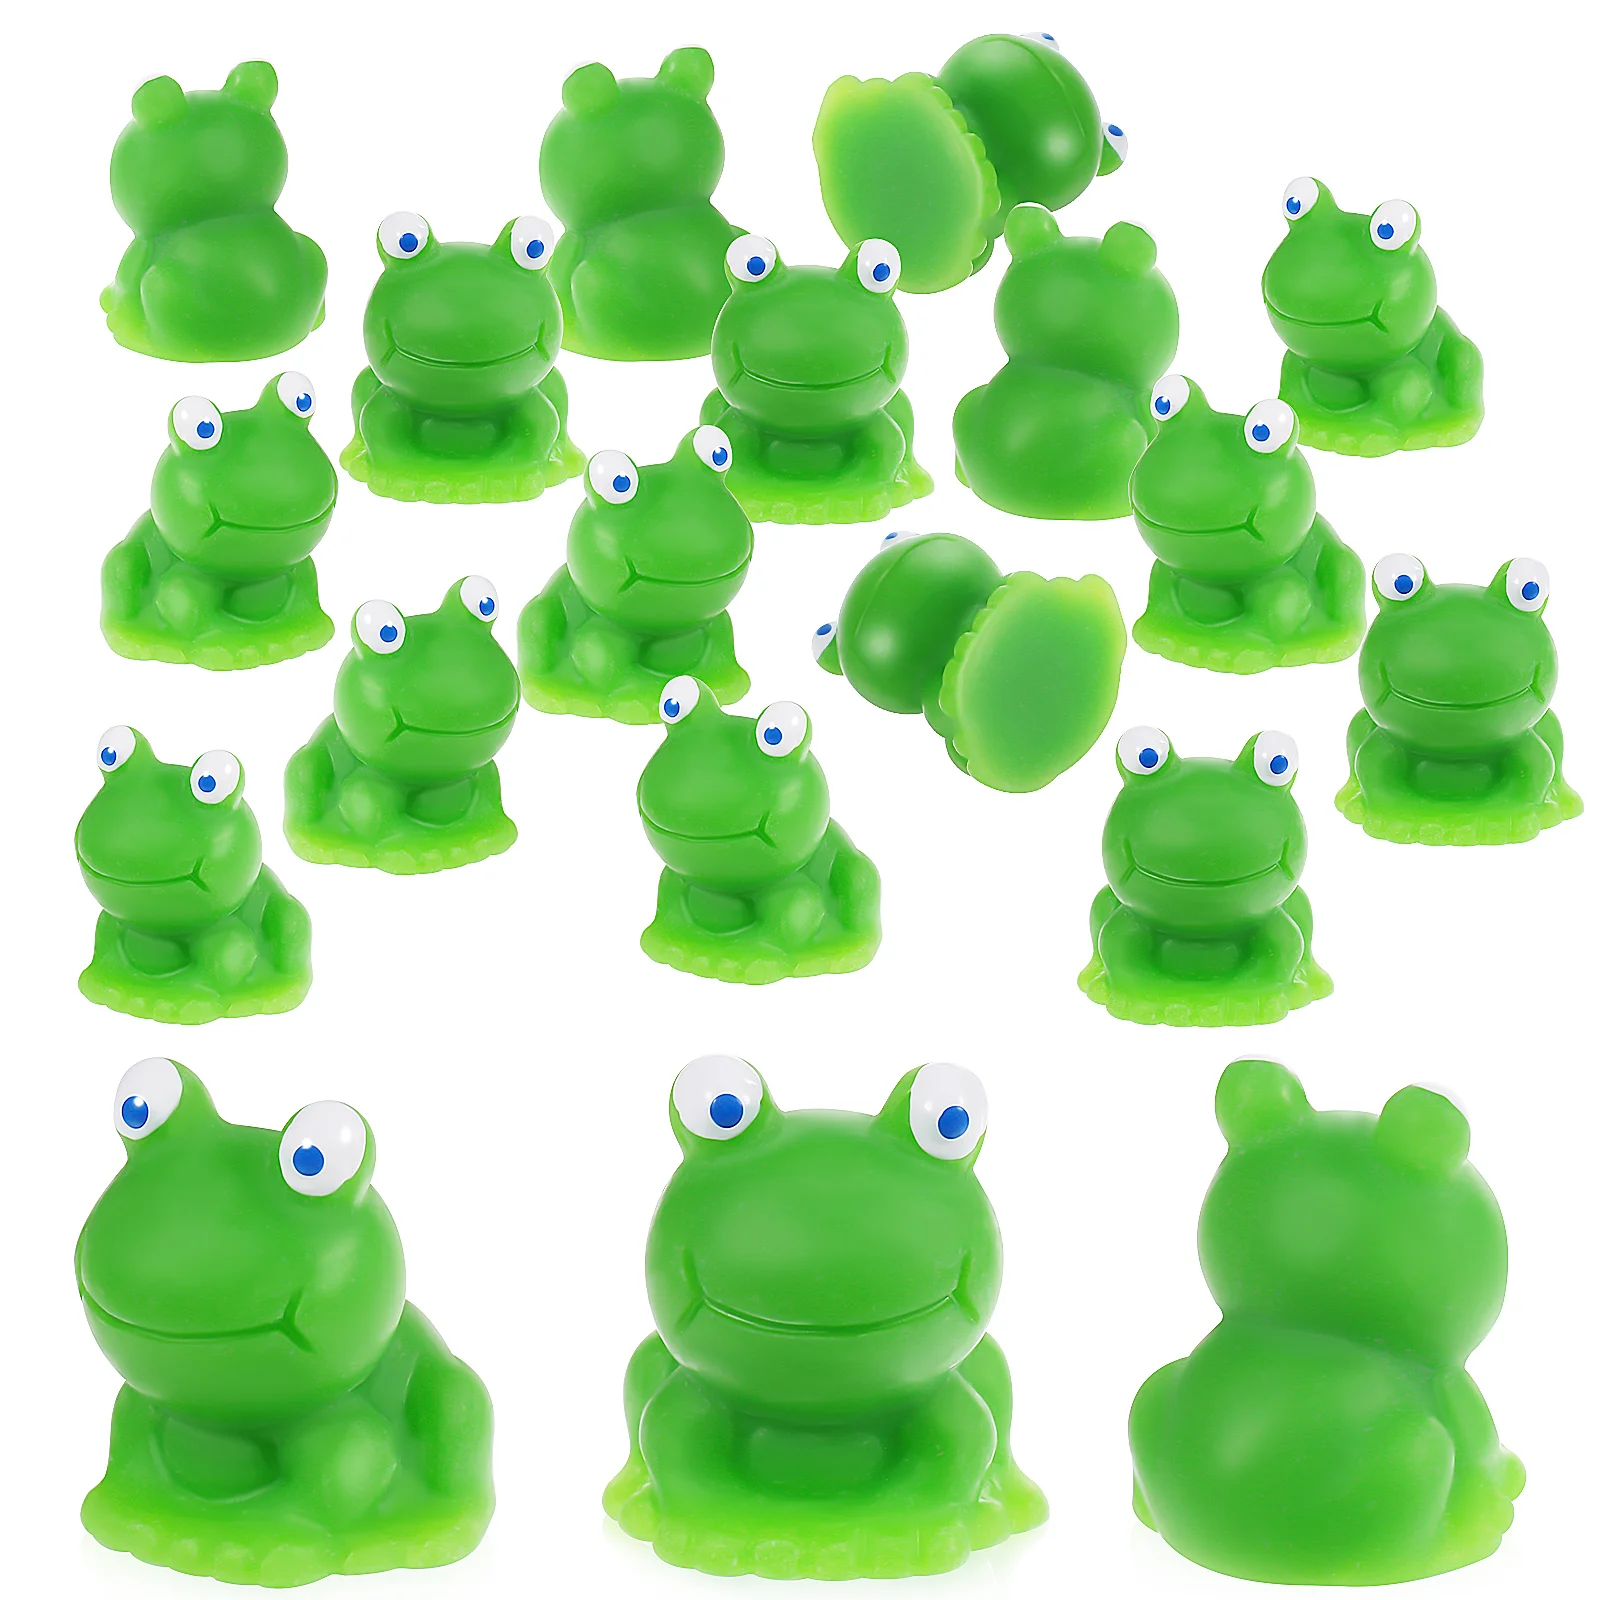 

Little Frog Miniature Landscape Statues Frogs Model Figurines Resin Decors Small Ornaments Adornments Toy Toys